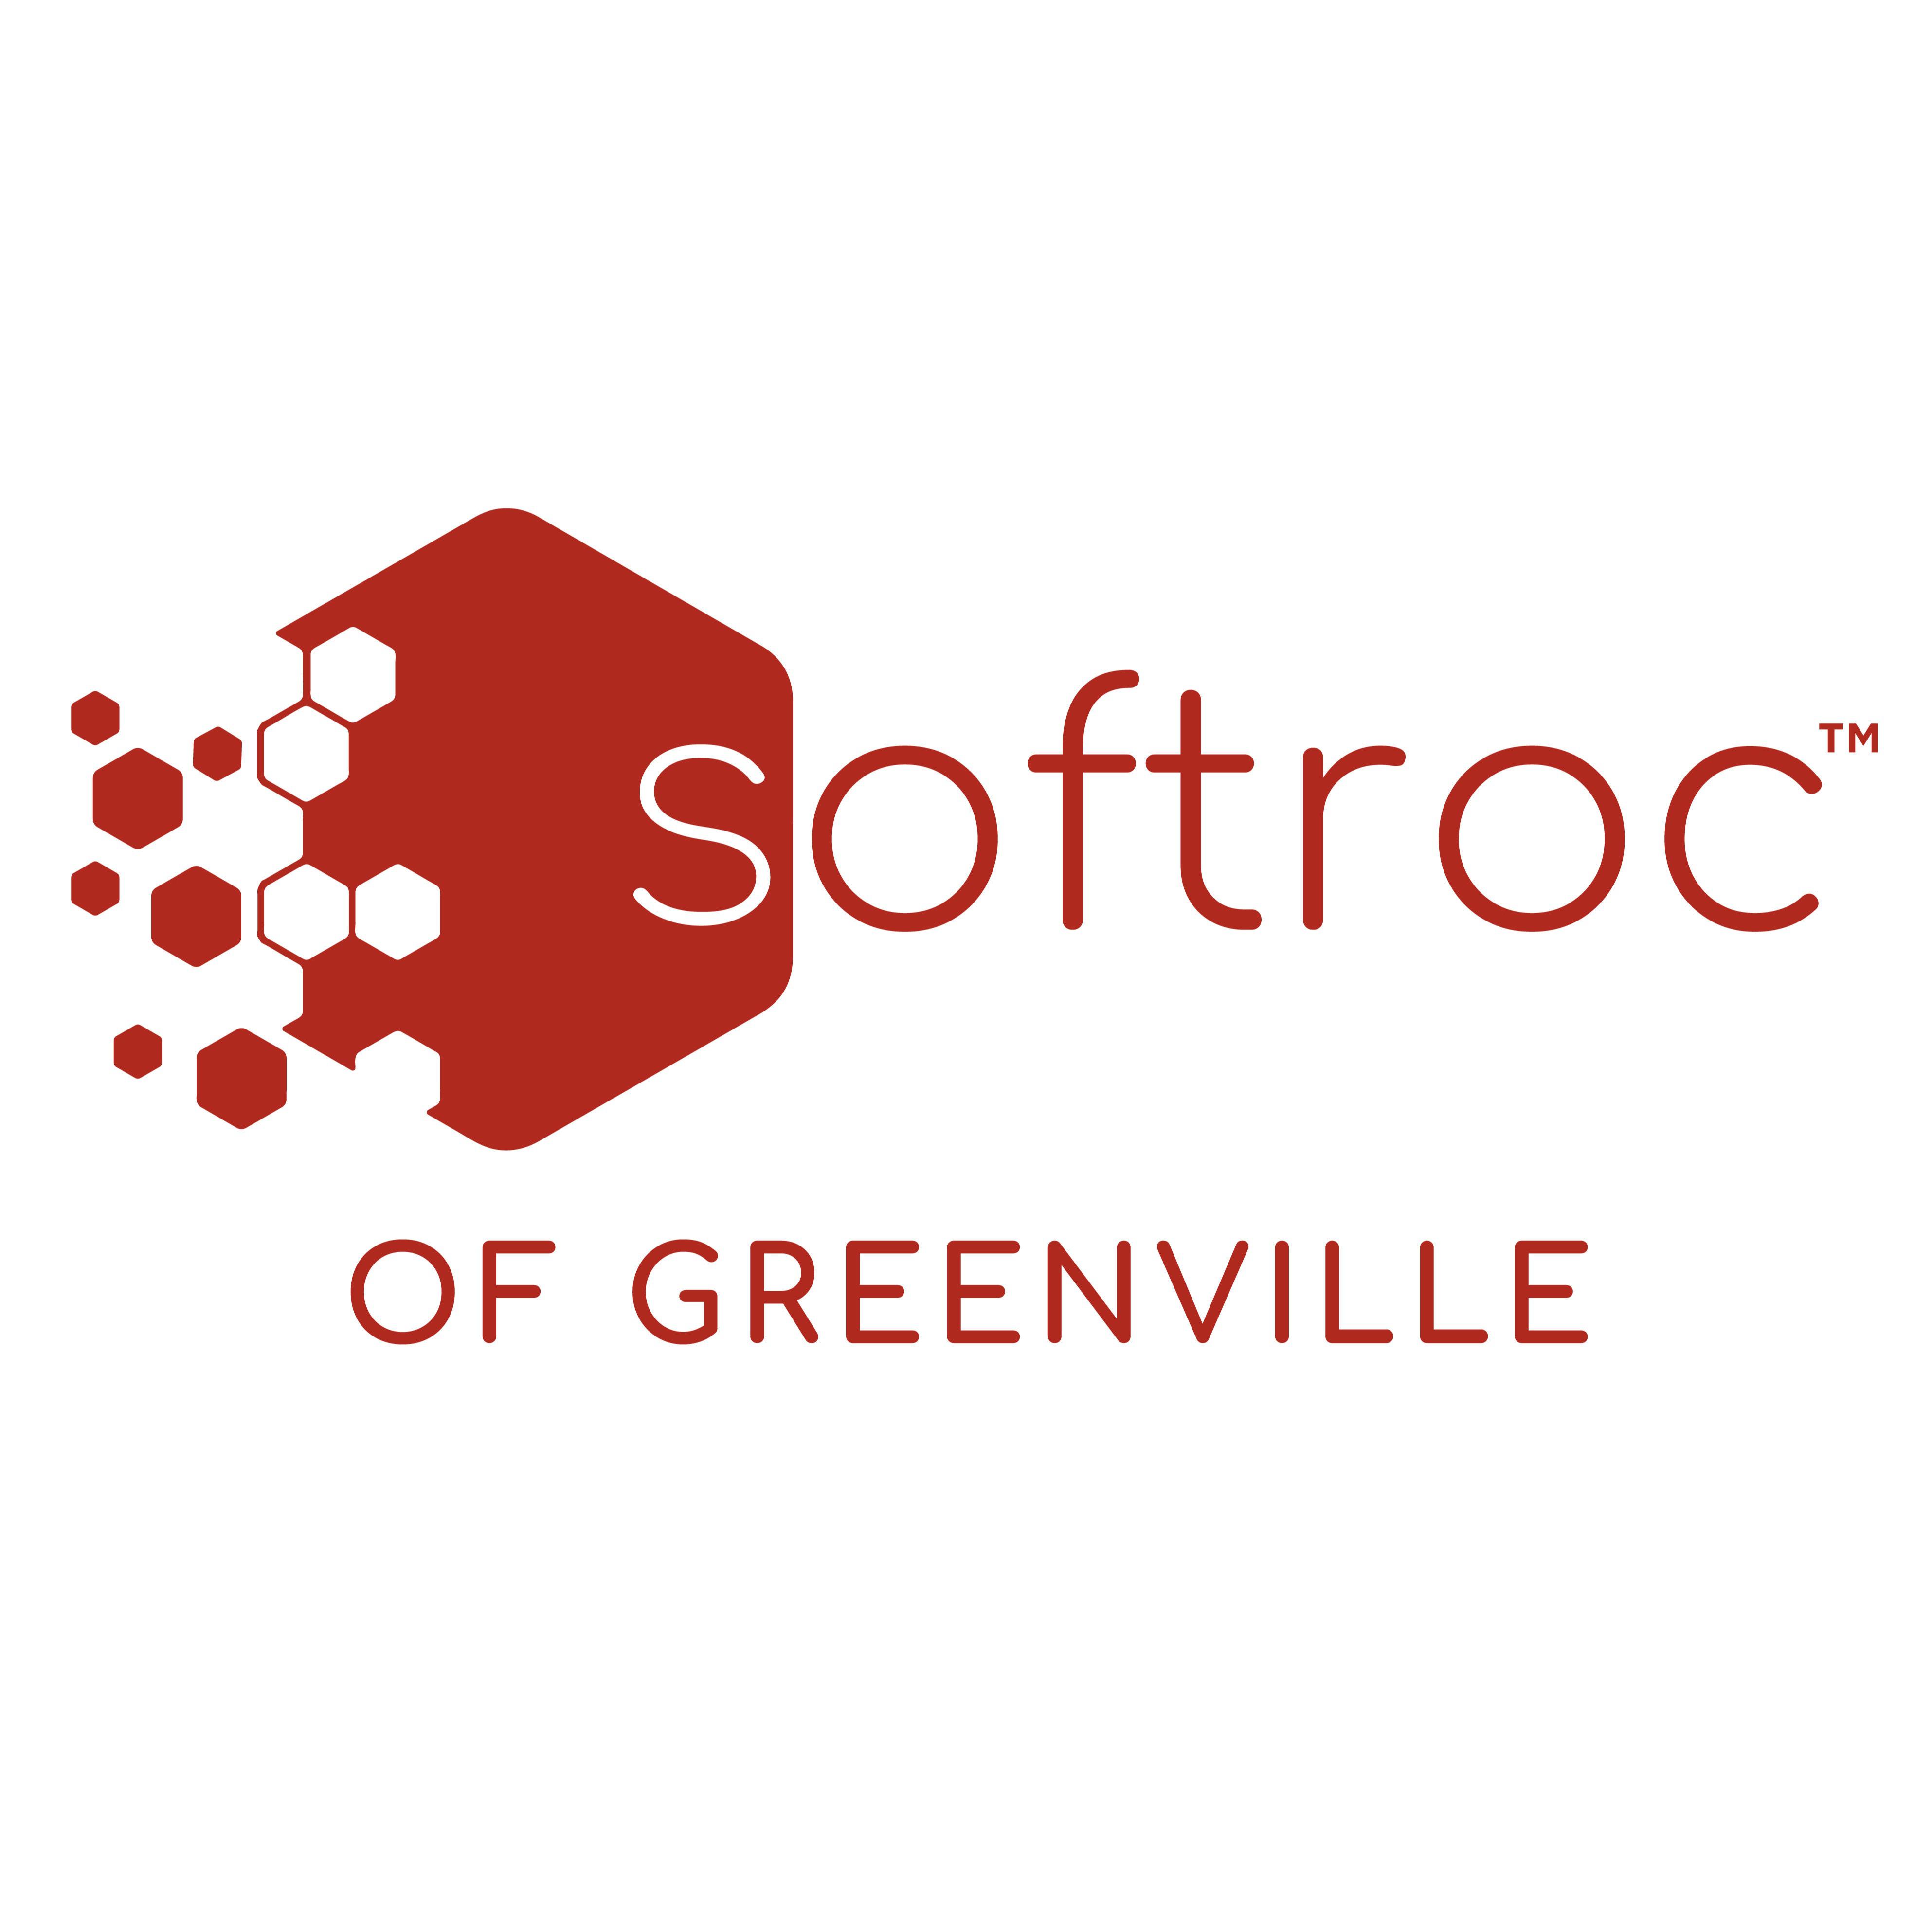 Softroc of Greenville